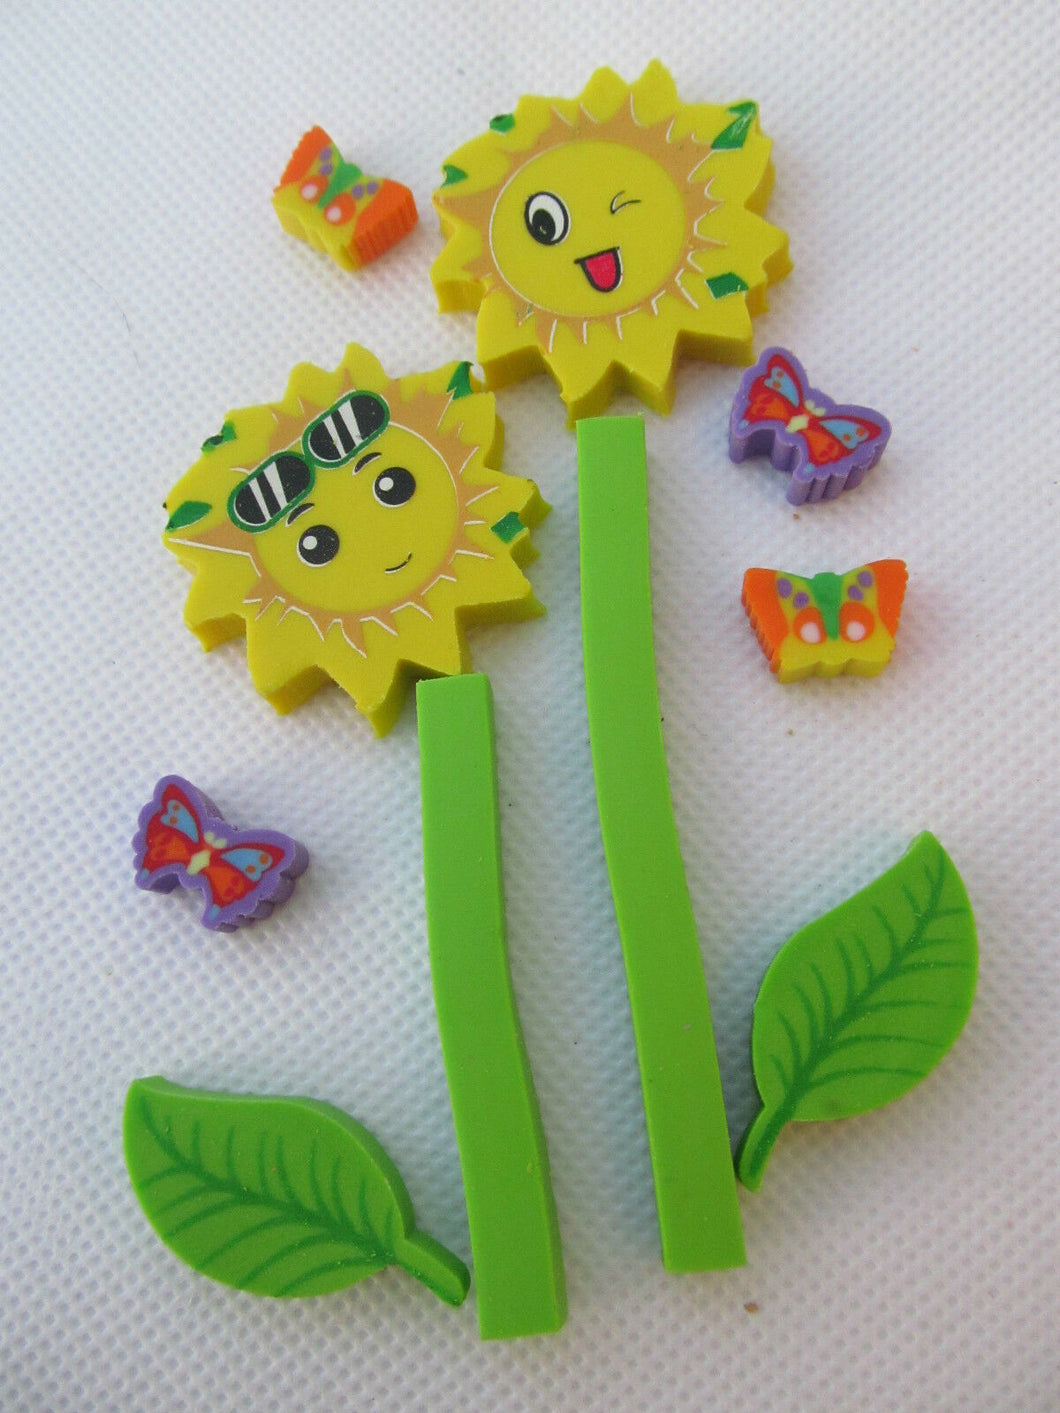 PACK OF SUNFLOWERS & BUTTERFLIES KAWAII JAPANESE STYLE NOVELTY ERASERS RUBBERS